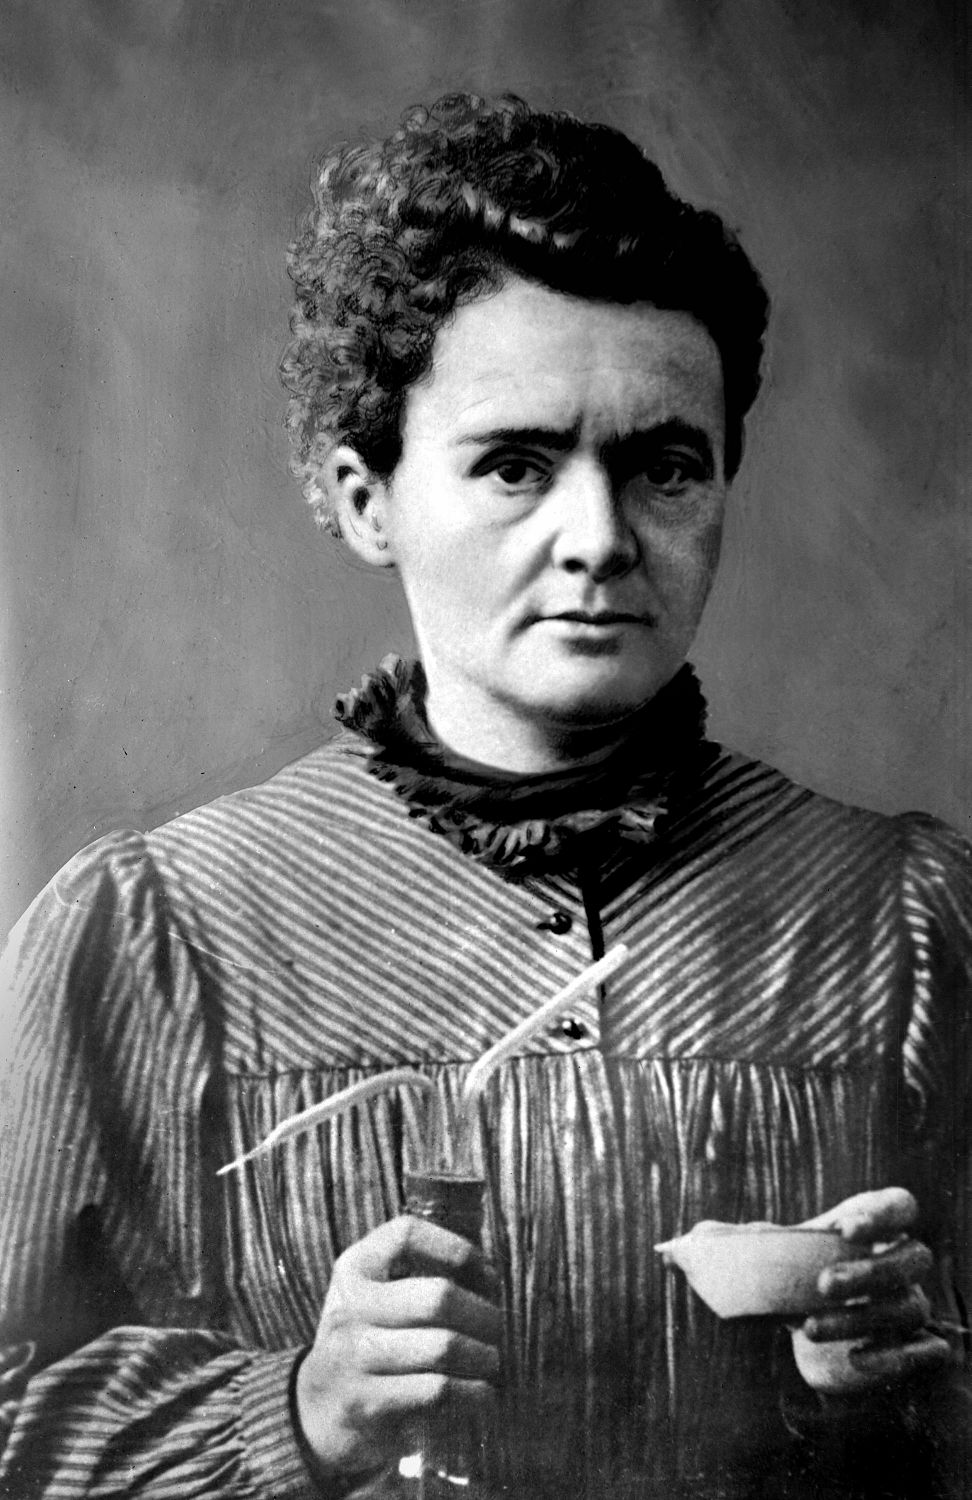 This photo shows Marie Curie, a famous female scientist.